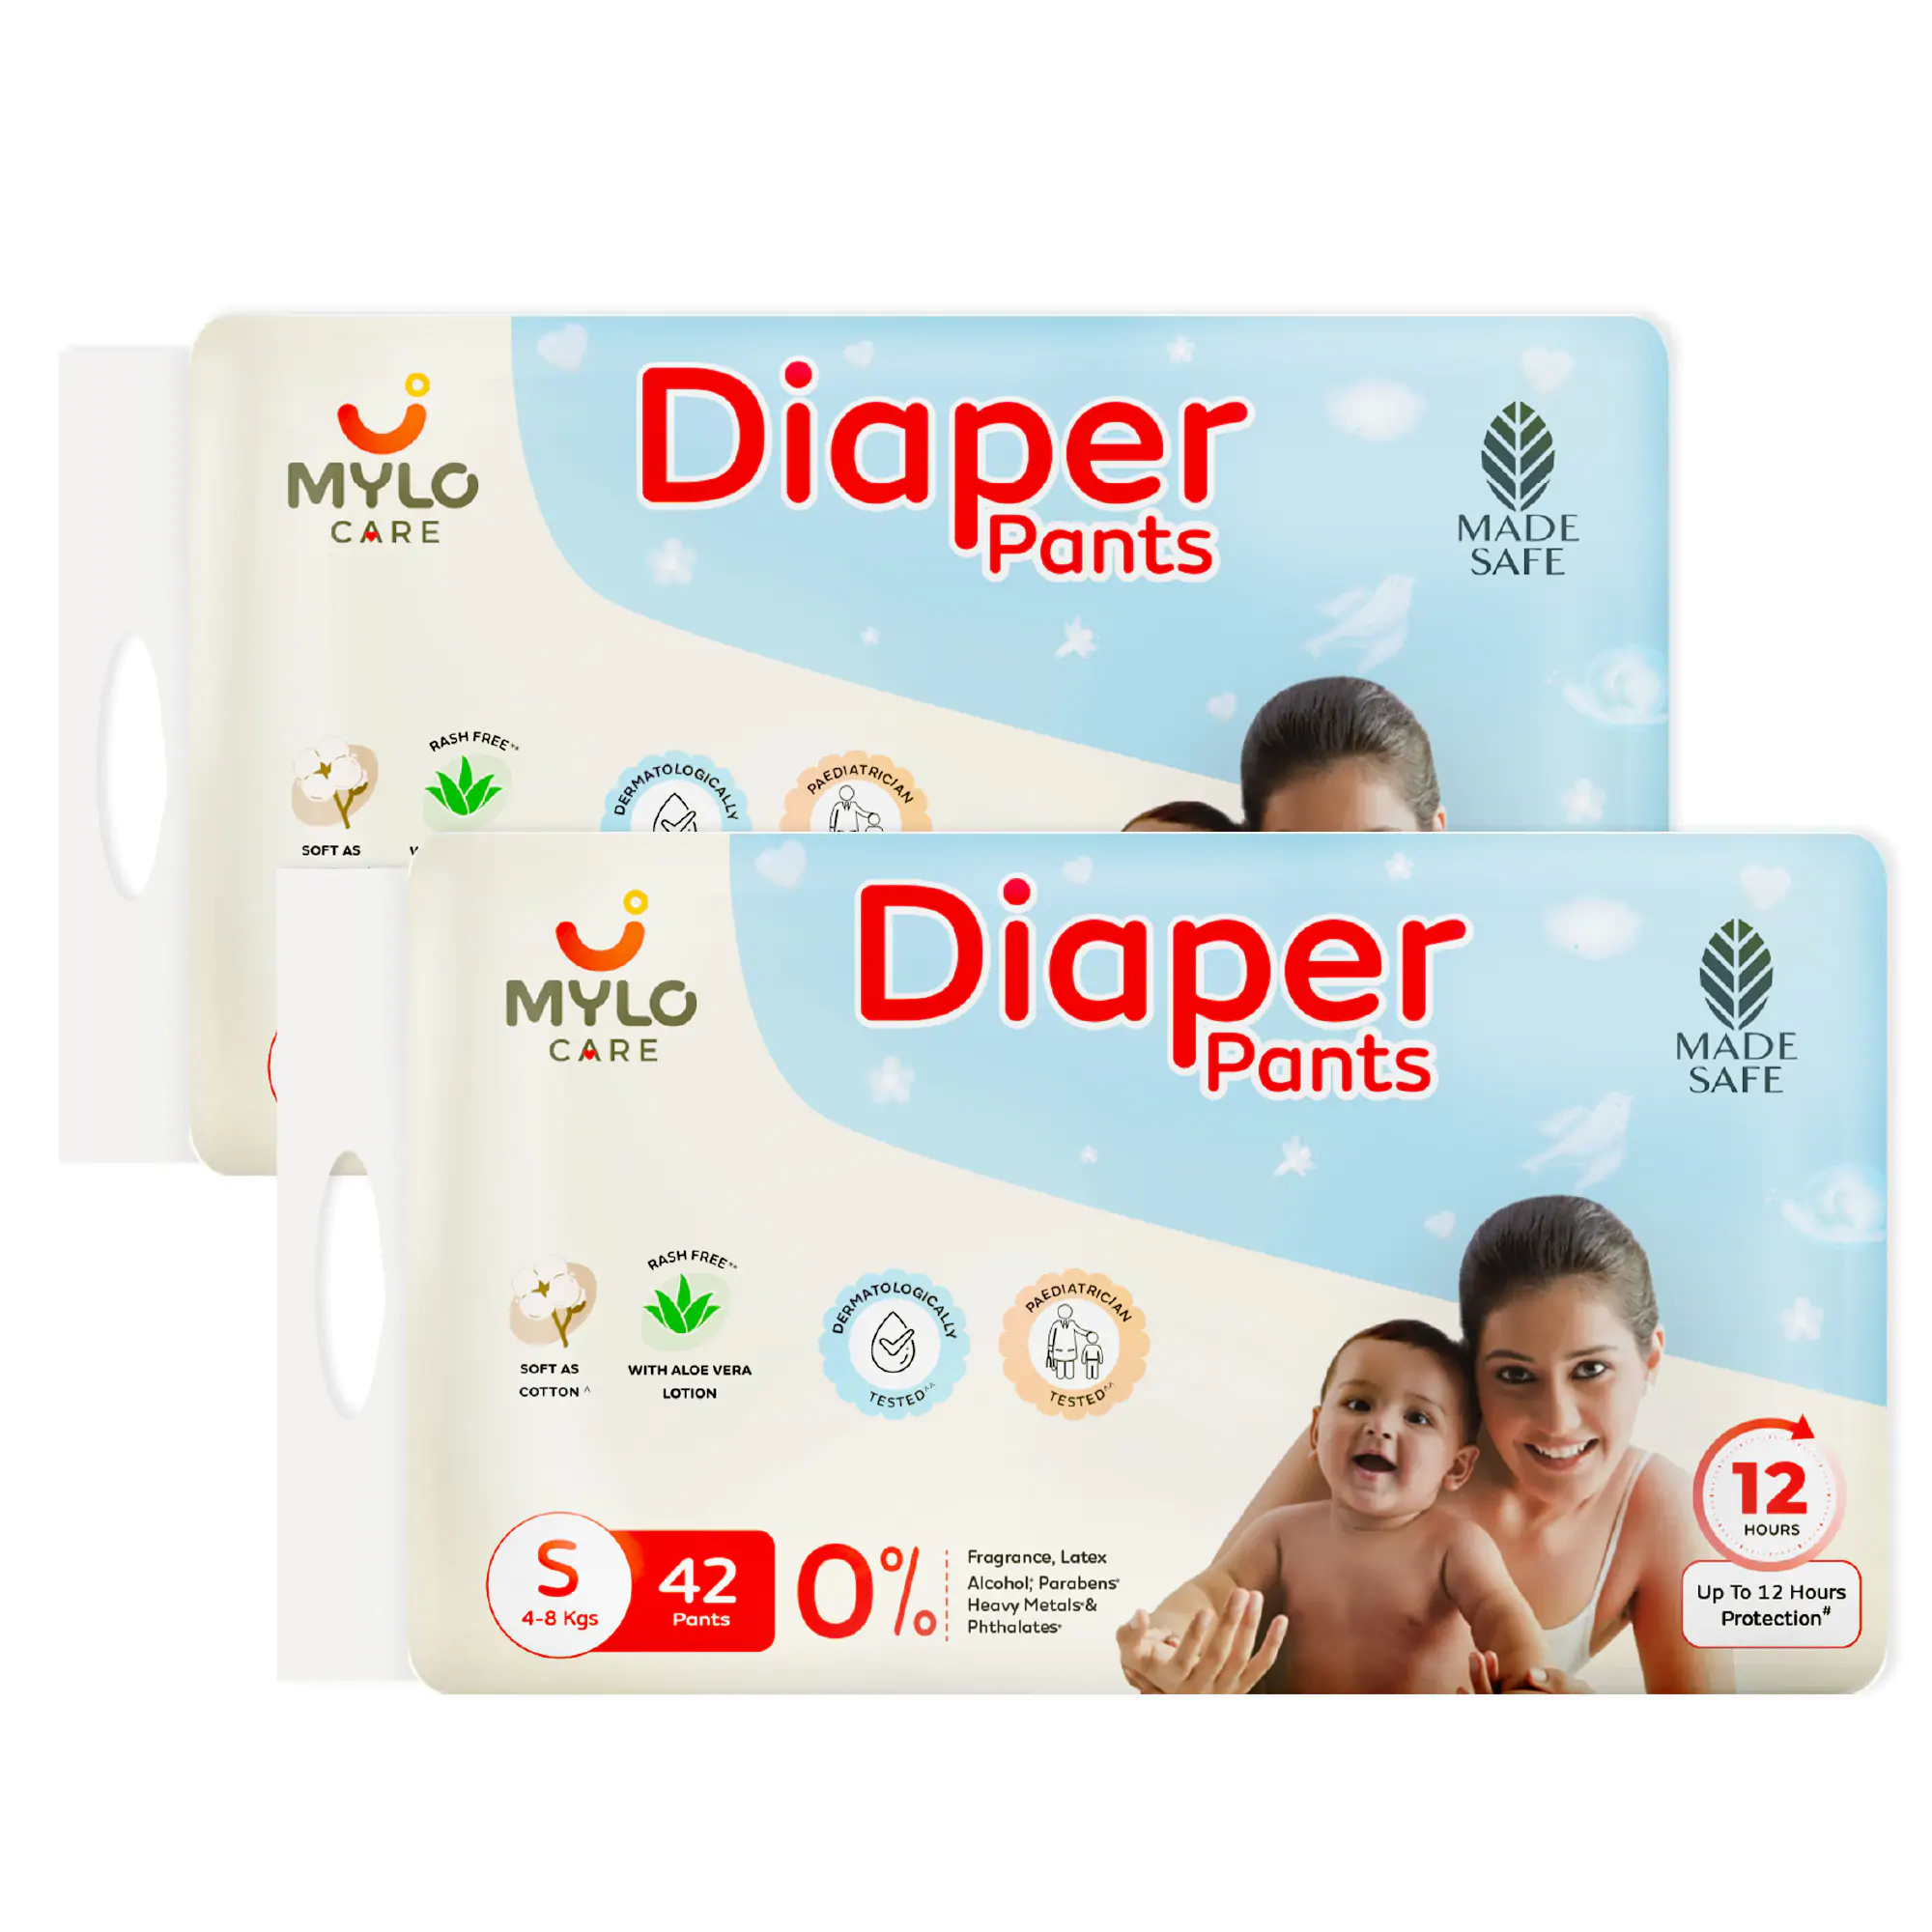 Mylo Care Baby Diaper Pants Small (S) Size, 4-8 kgs with ADL Technology - 84 Count - 12 Hours Protection 